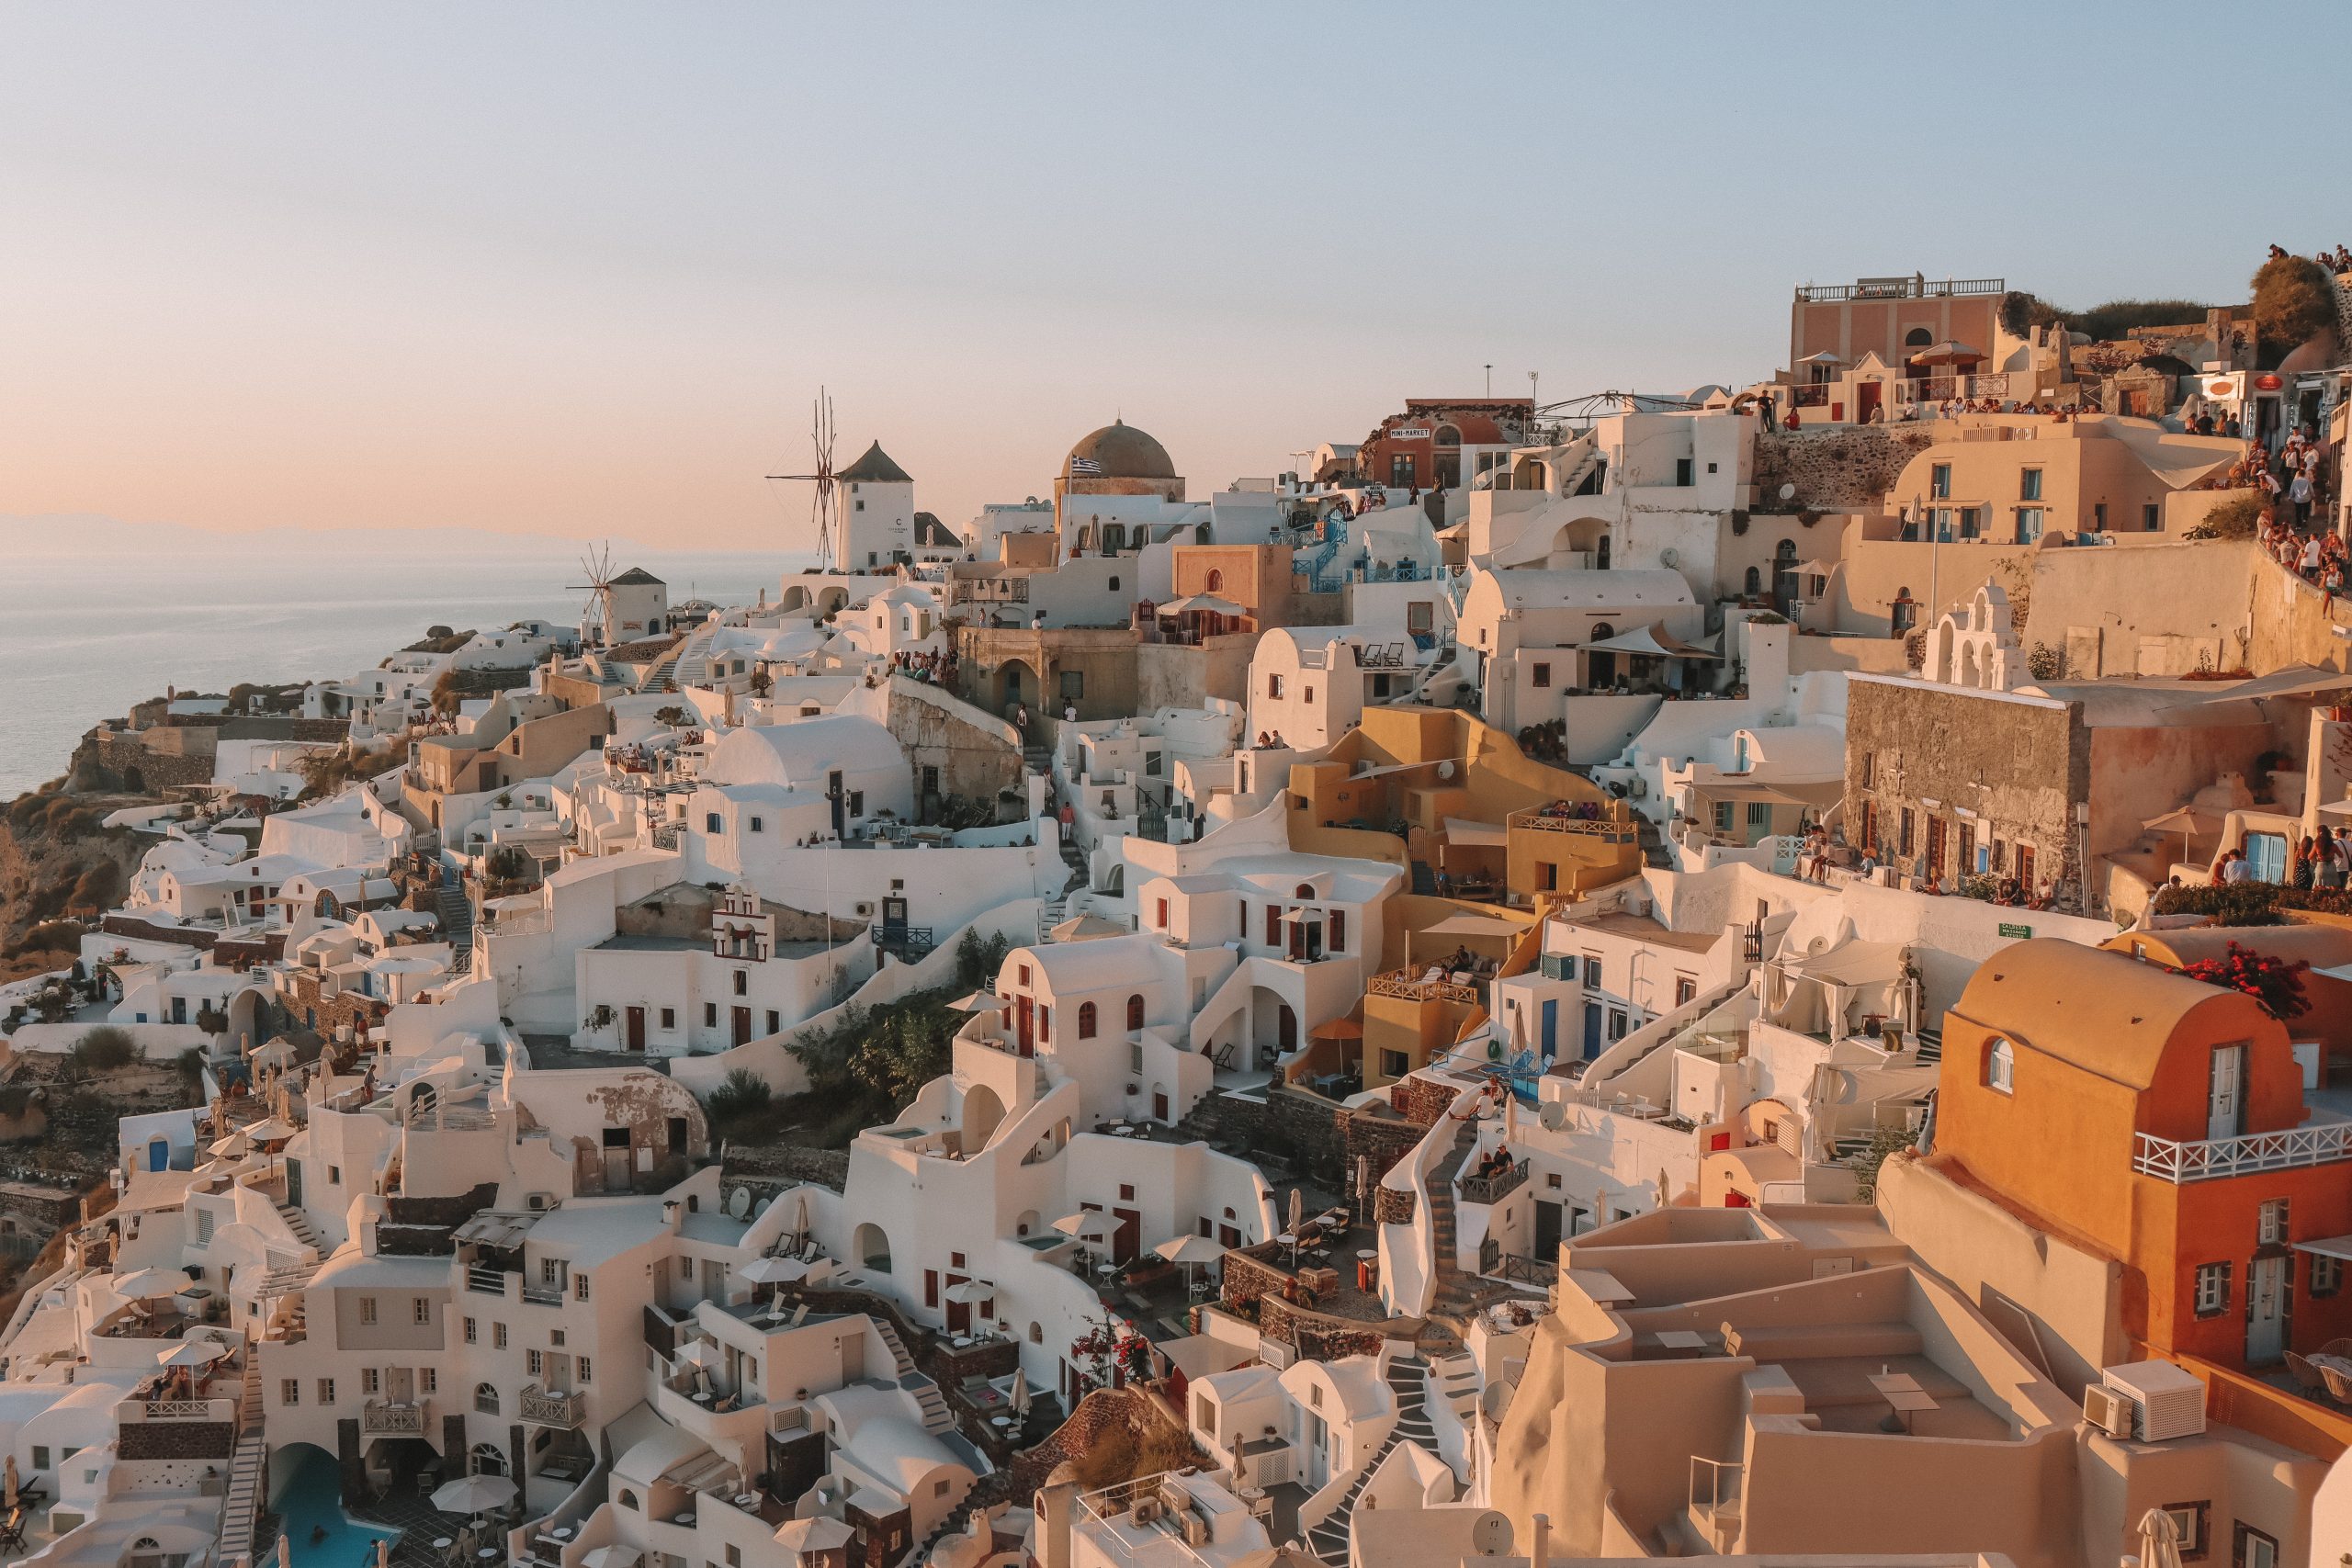 Oia buildings during sunset with a view from the Kastro